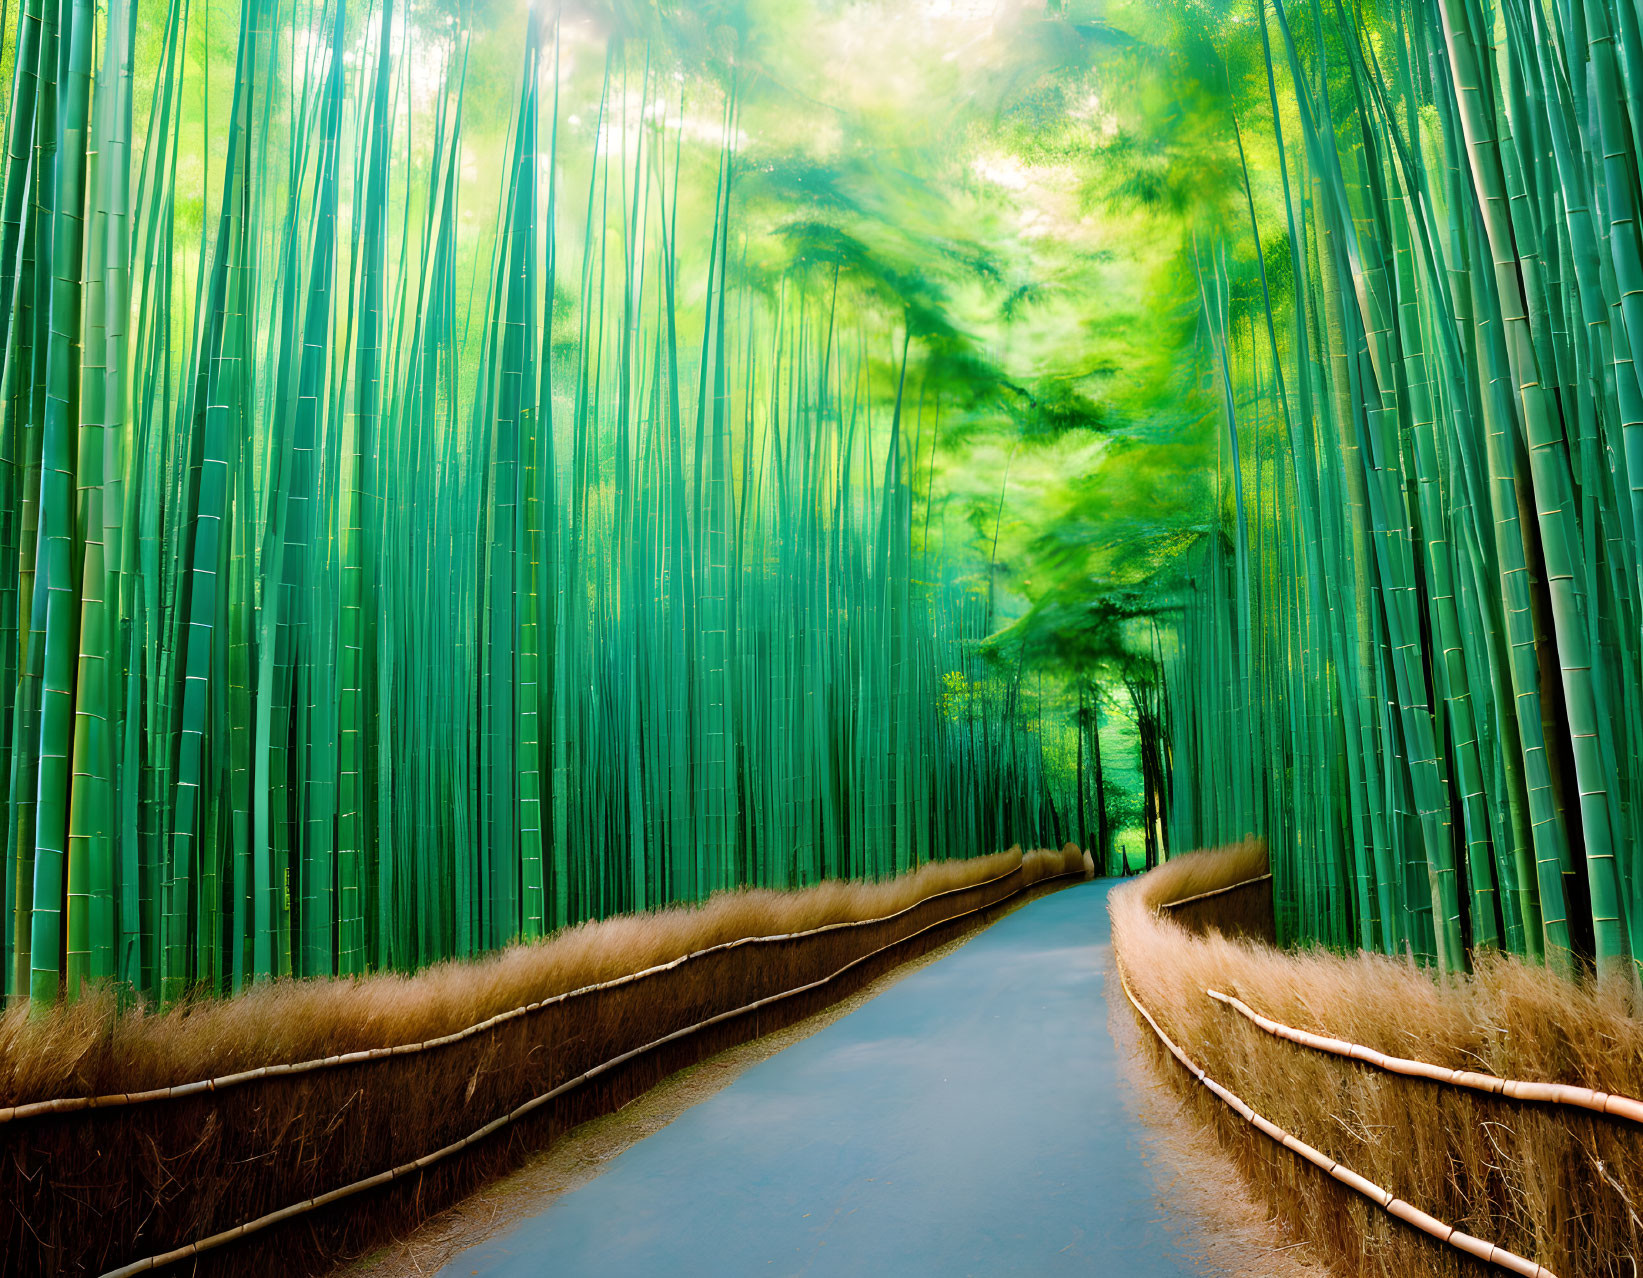 Tranquil Path Through Dense Bamboo Forest